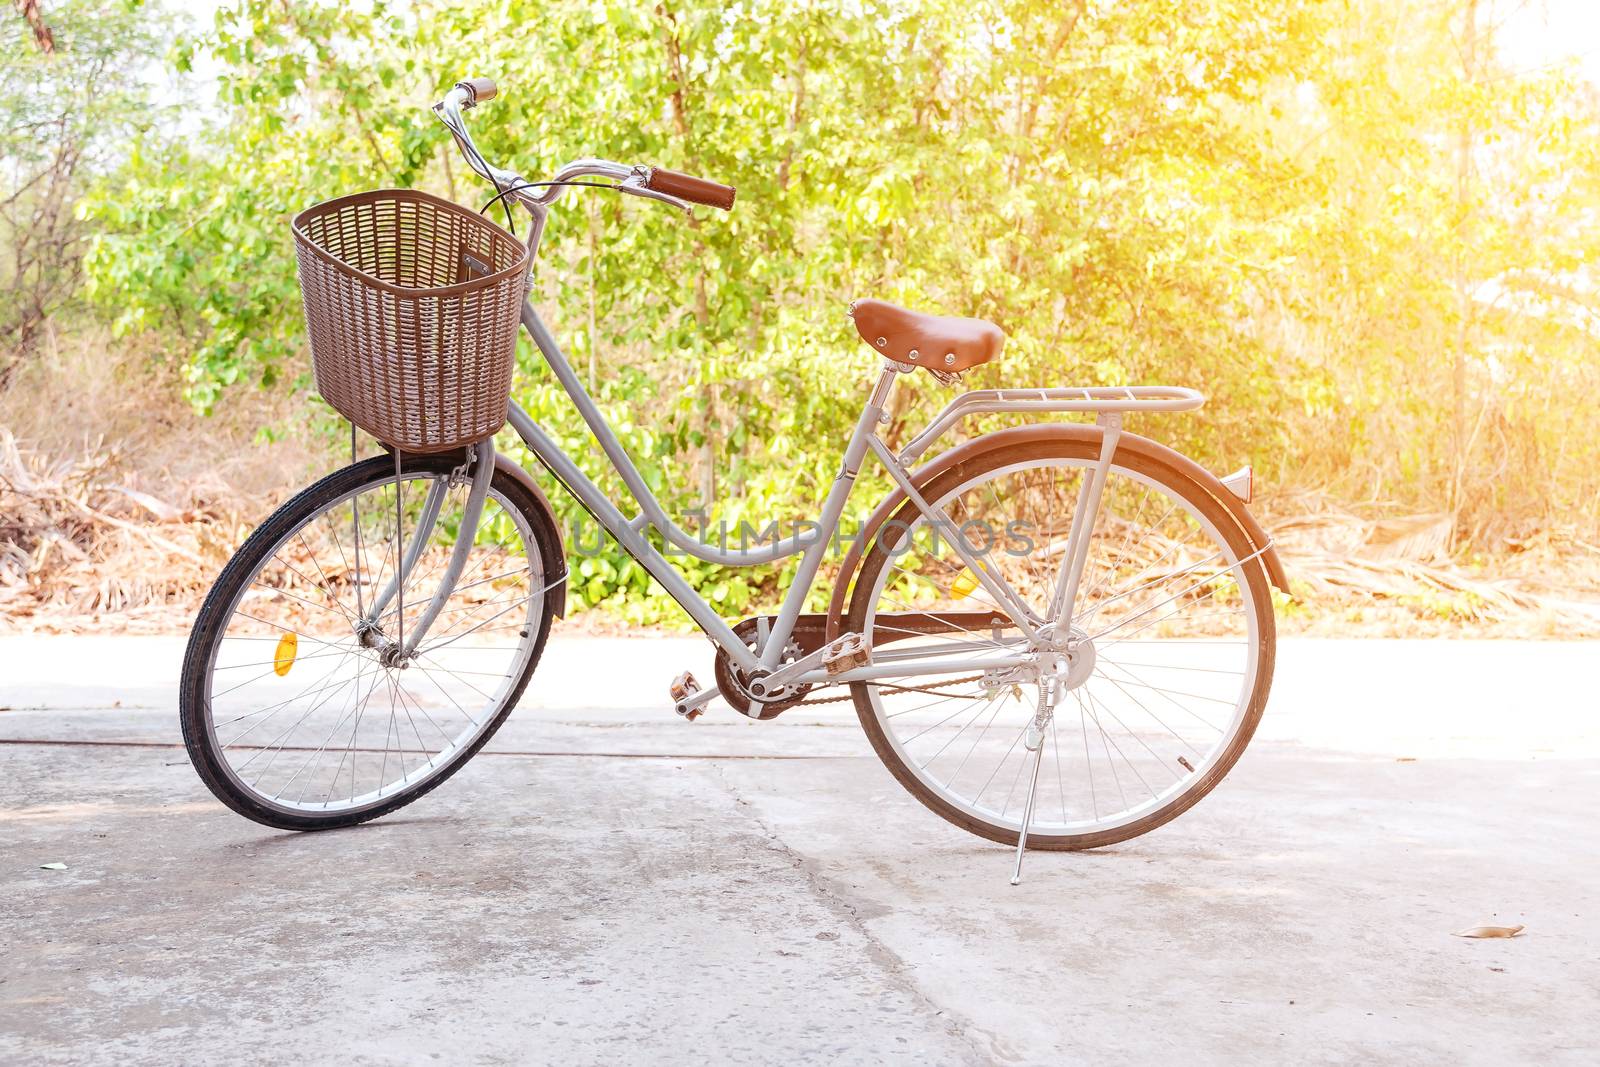 Beautiful vintage bicycle in the forest with colorful sunlight ; vintage filter style for greeting card and post card.